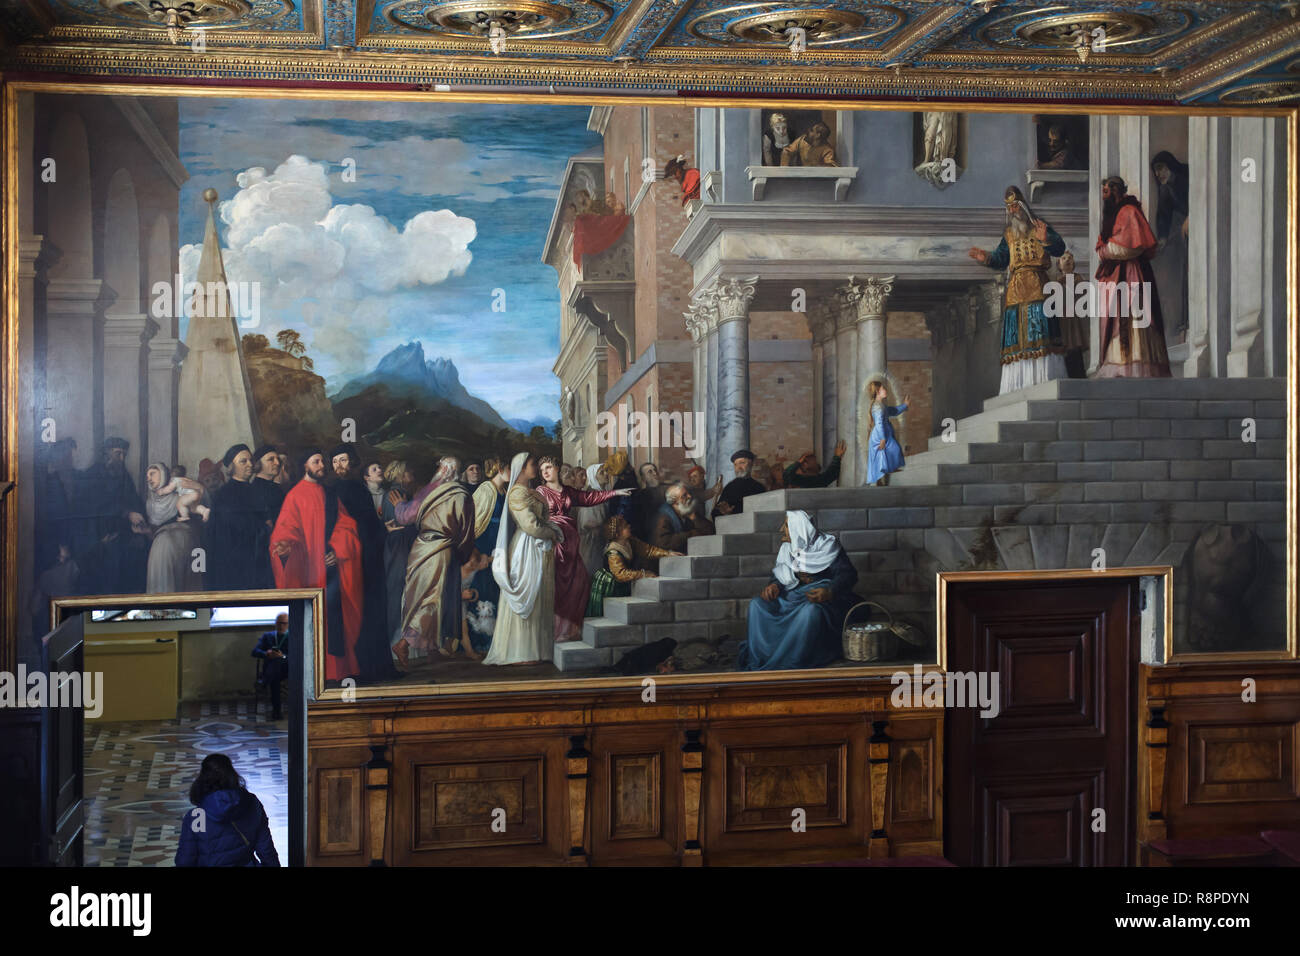 Painting 'Presentation of the Virgin at the Temple' by Italian Renaissance painter Titian (1534-1538) on display in the Gallerie dell'Accademia in Venice, Italy. Stock Photo